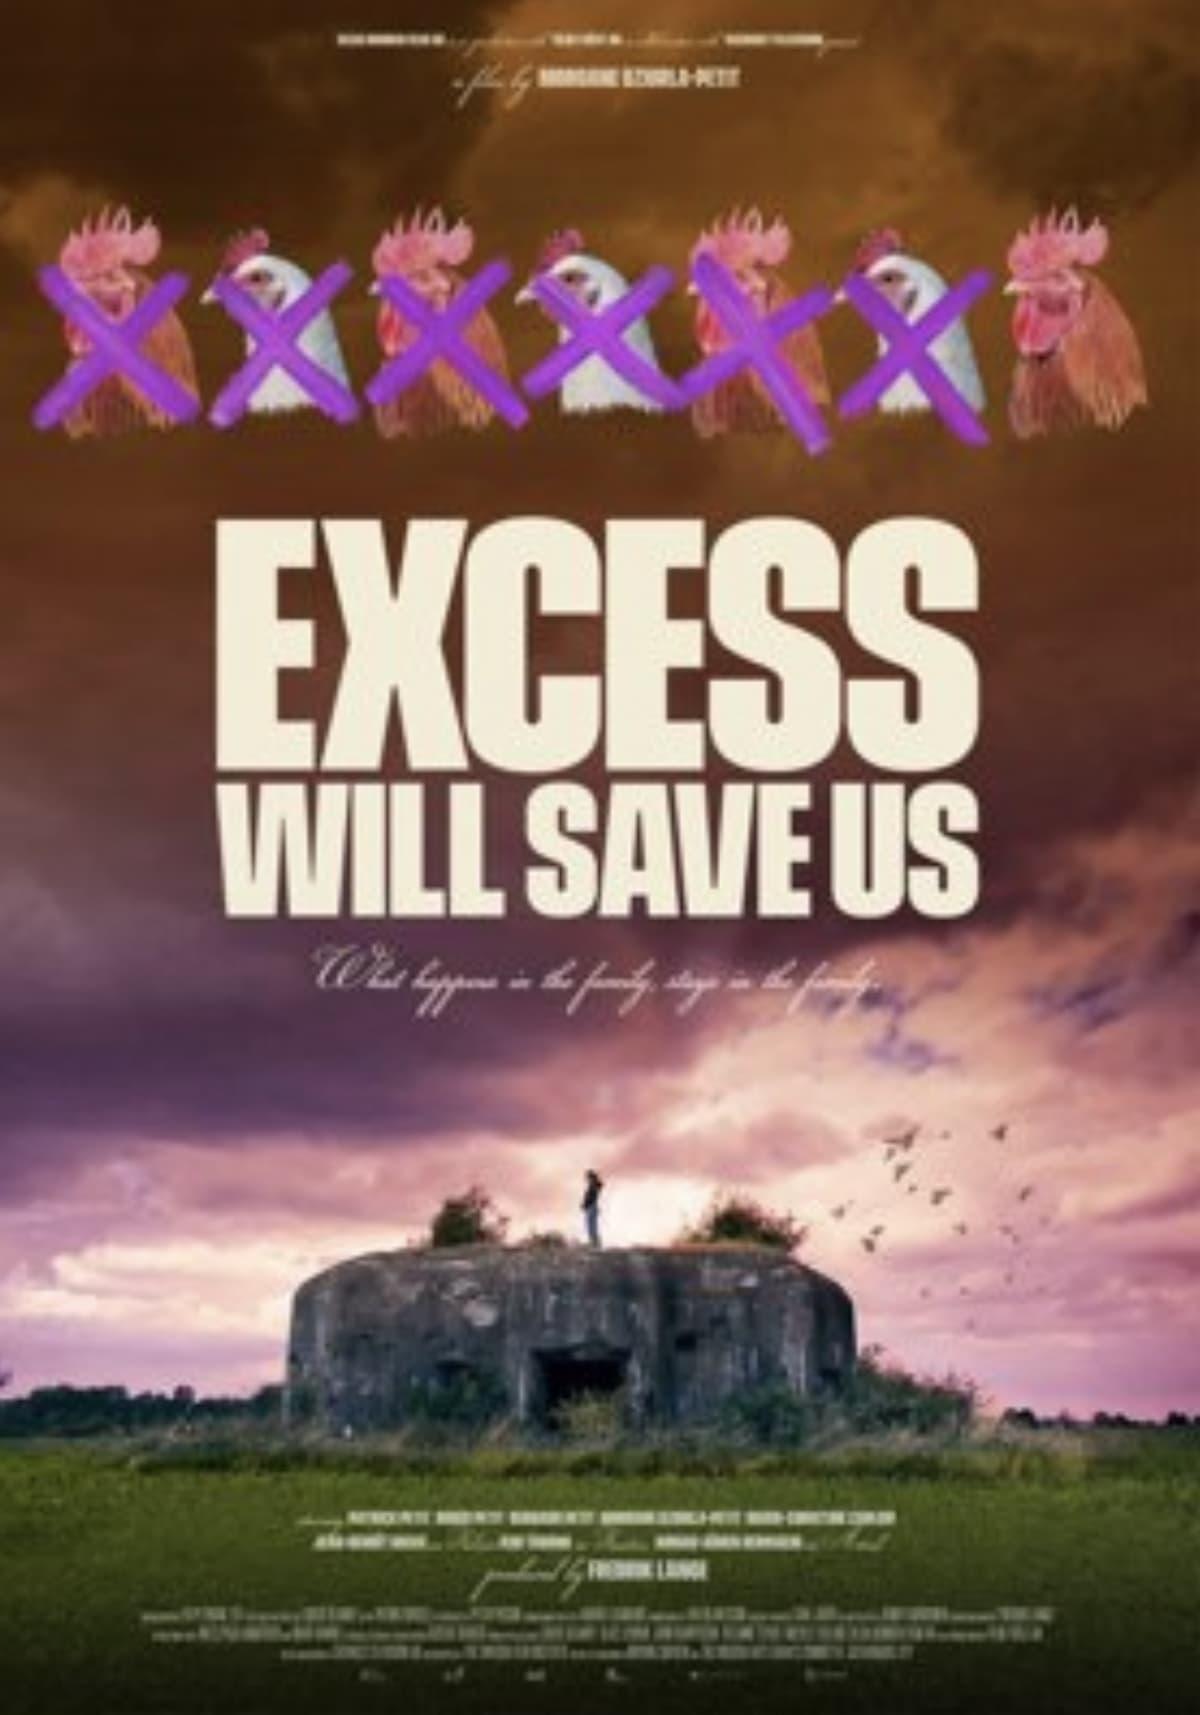 Excess Will Save Us poster